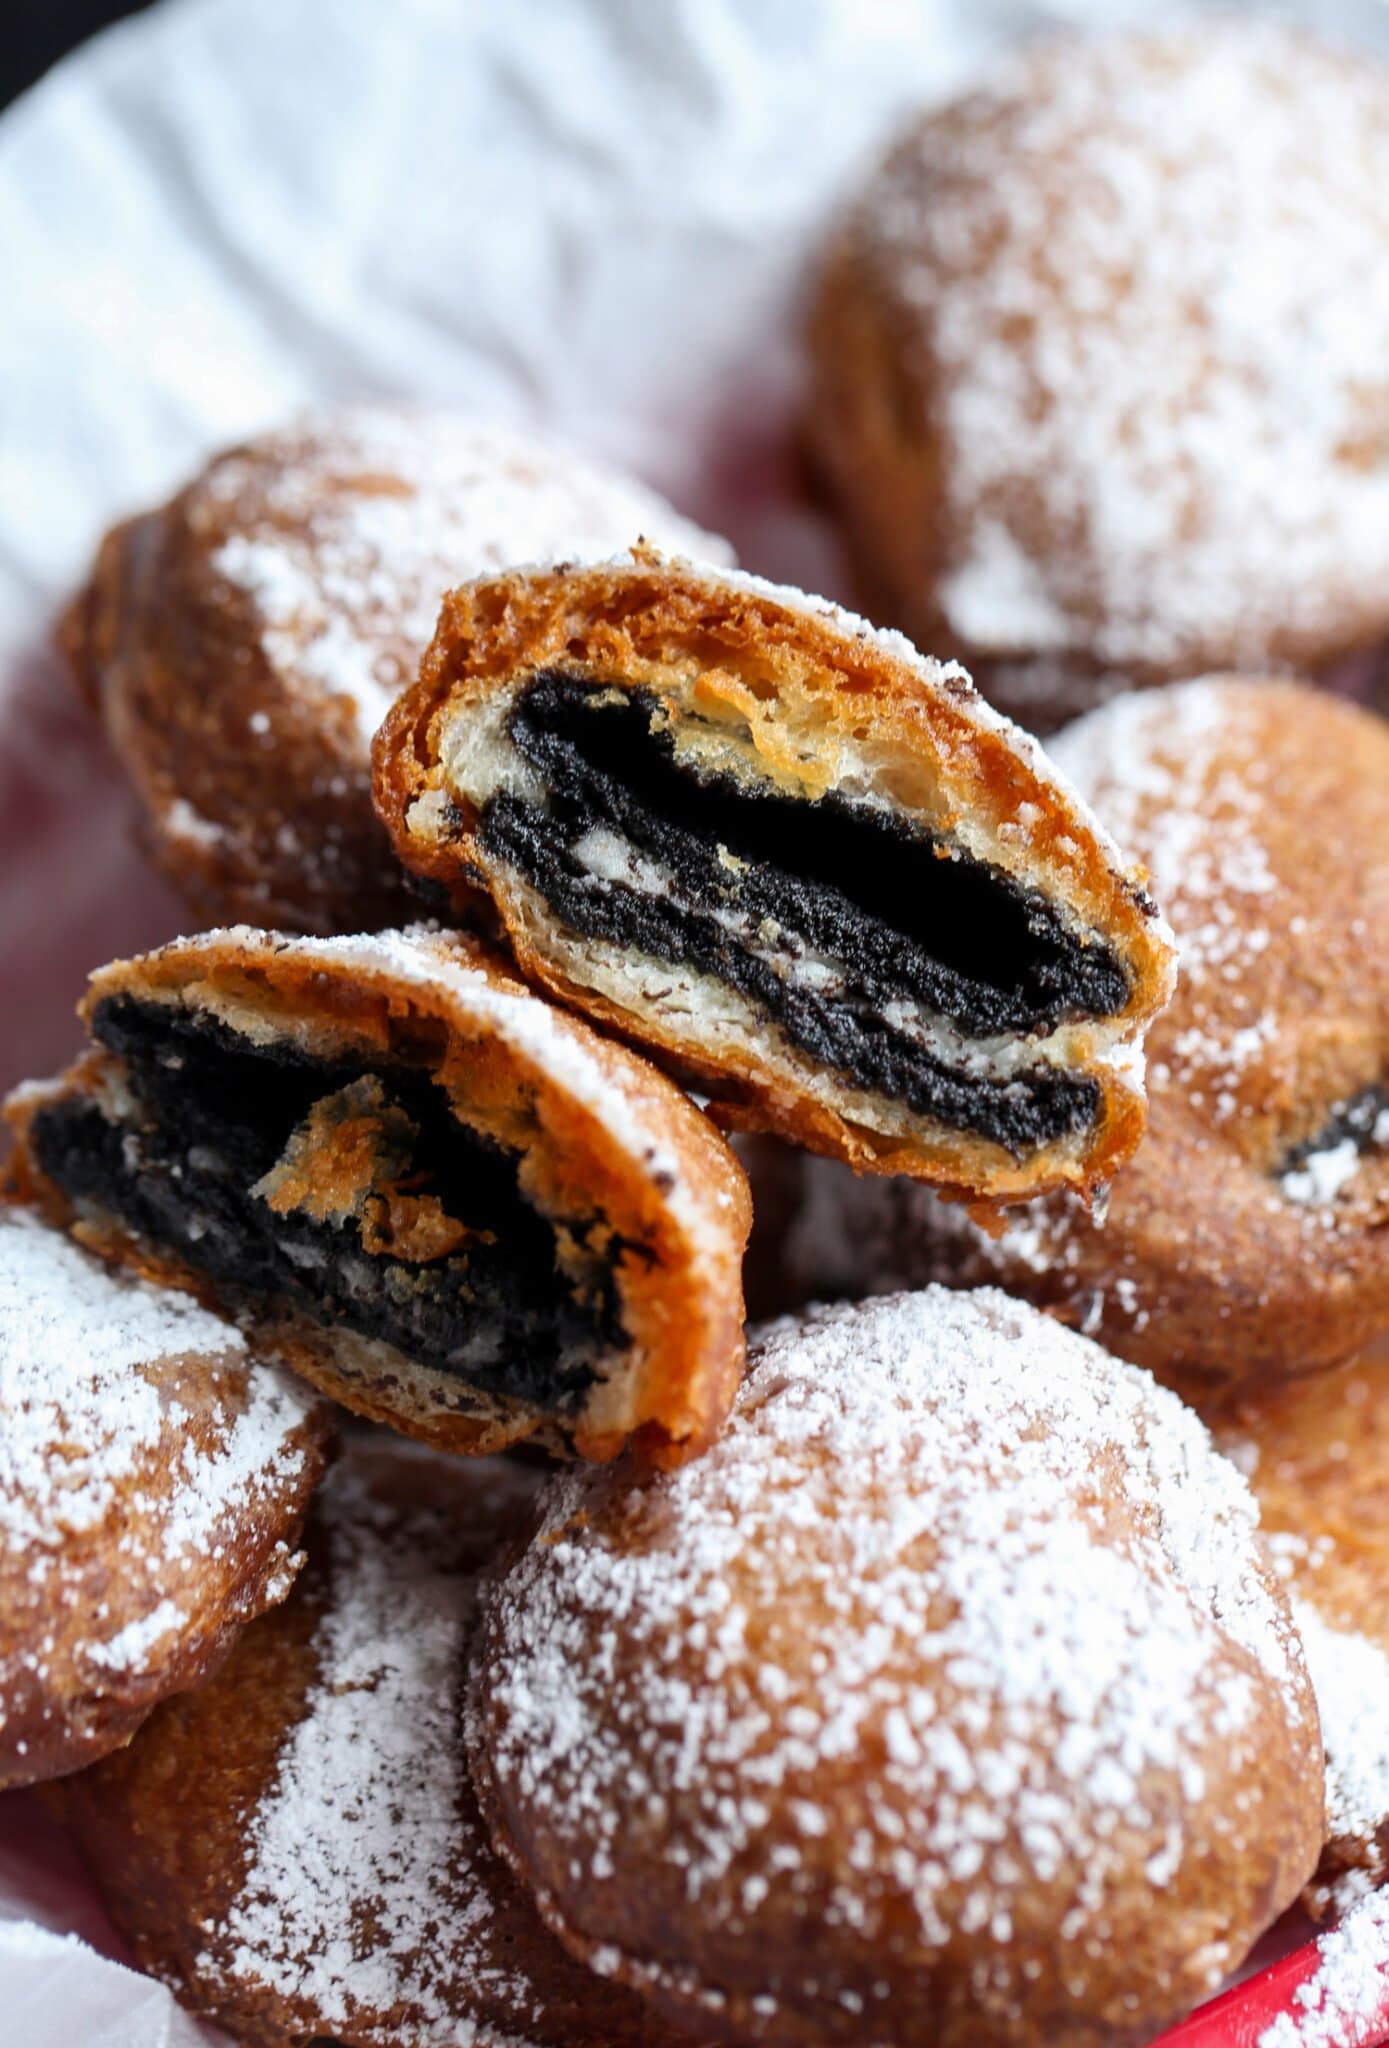 How To Make Easy Deep Fried Oreos - Cookies and Cups